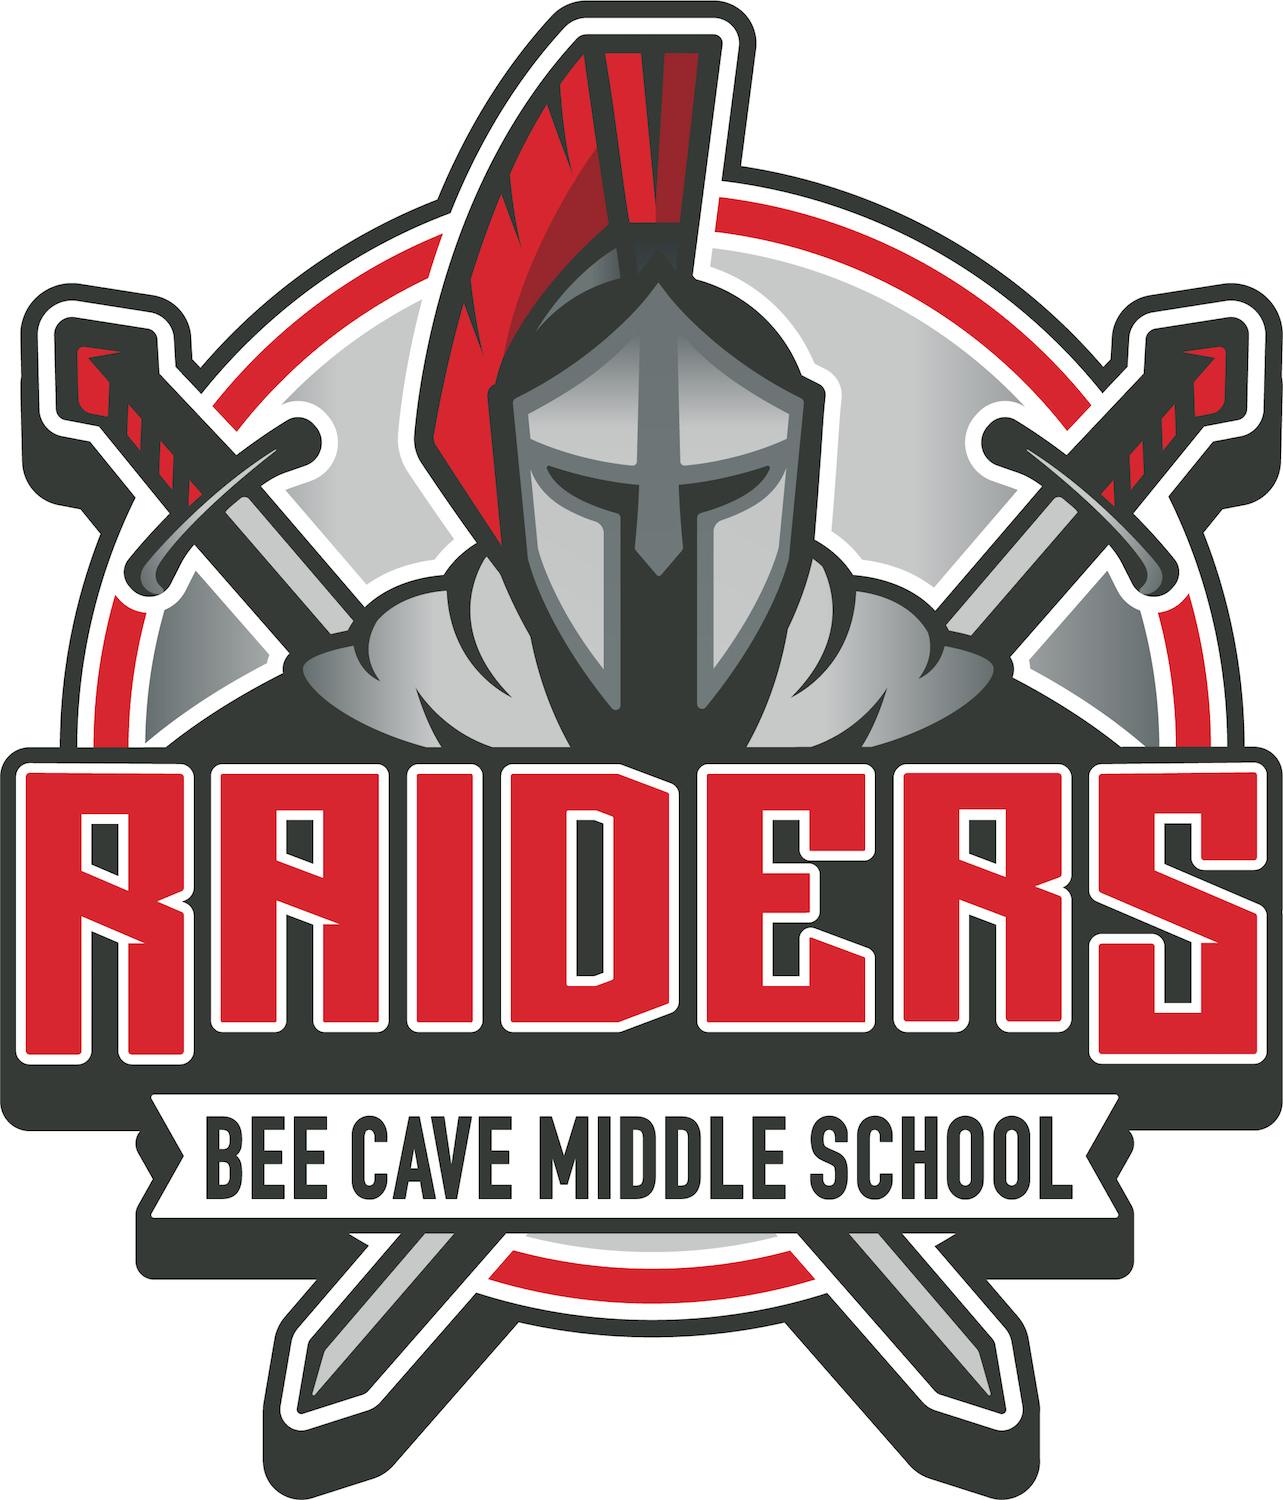 Cave Logo - New Bee Cave Middle School seal and logo unveiled | Community Impact ...